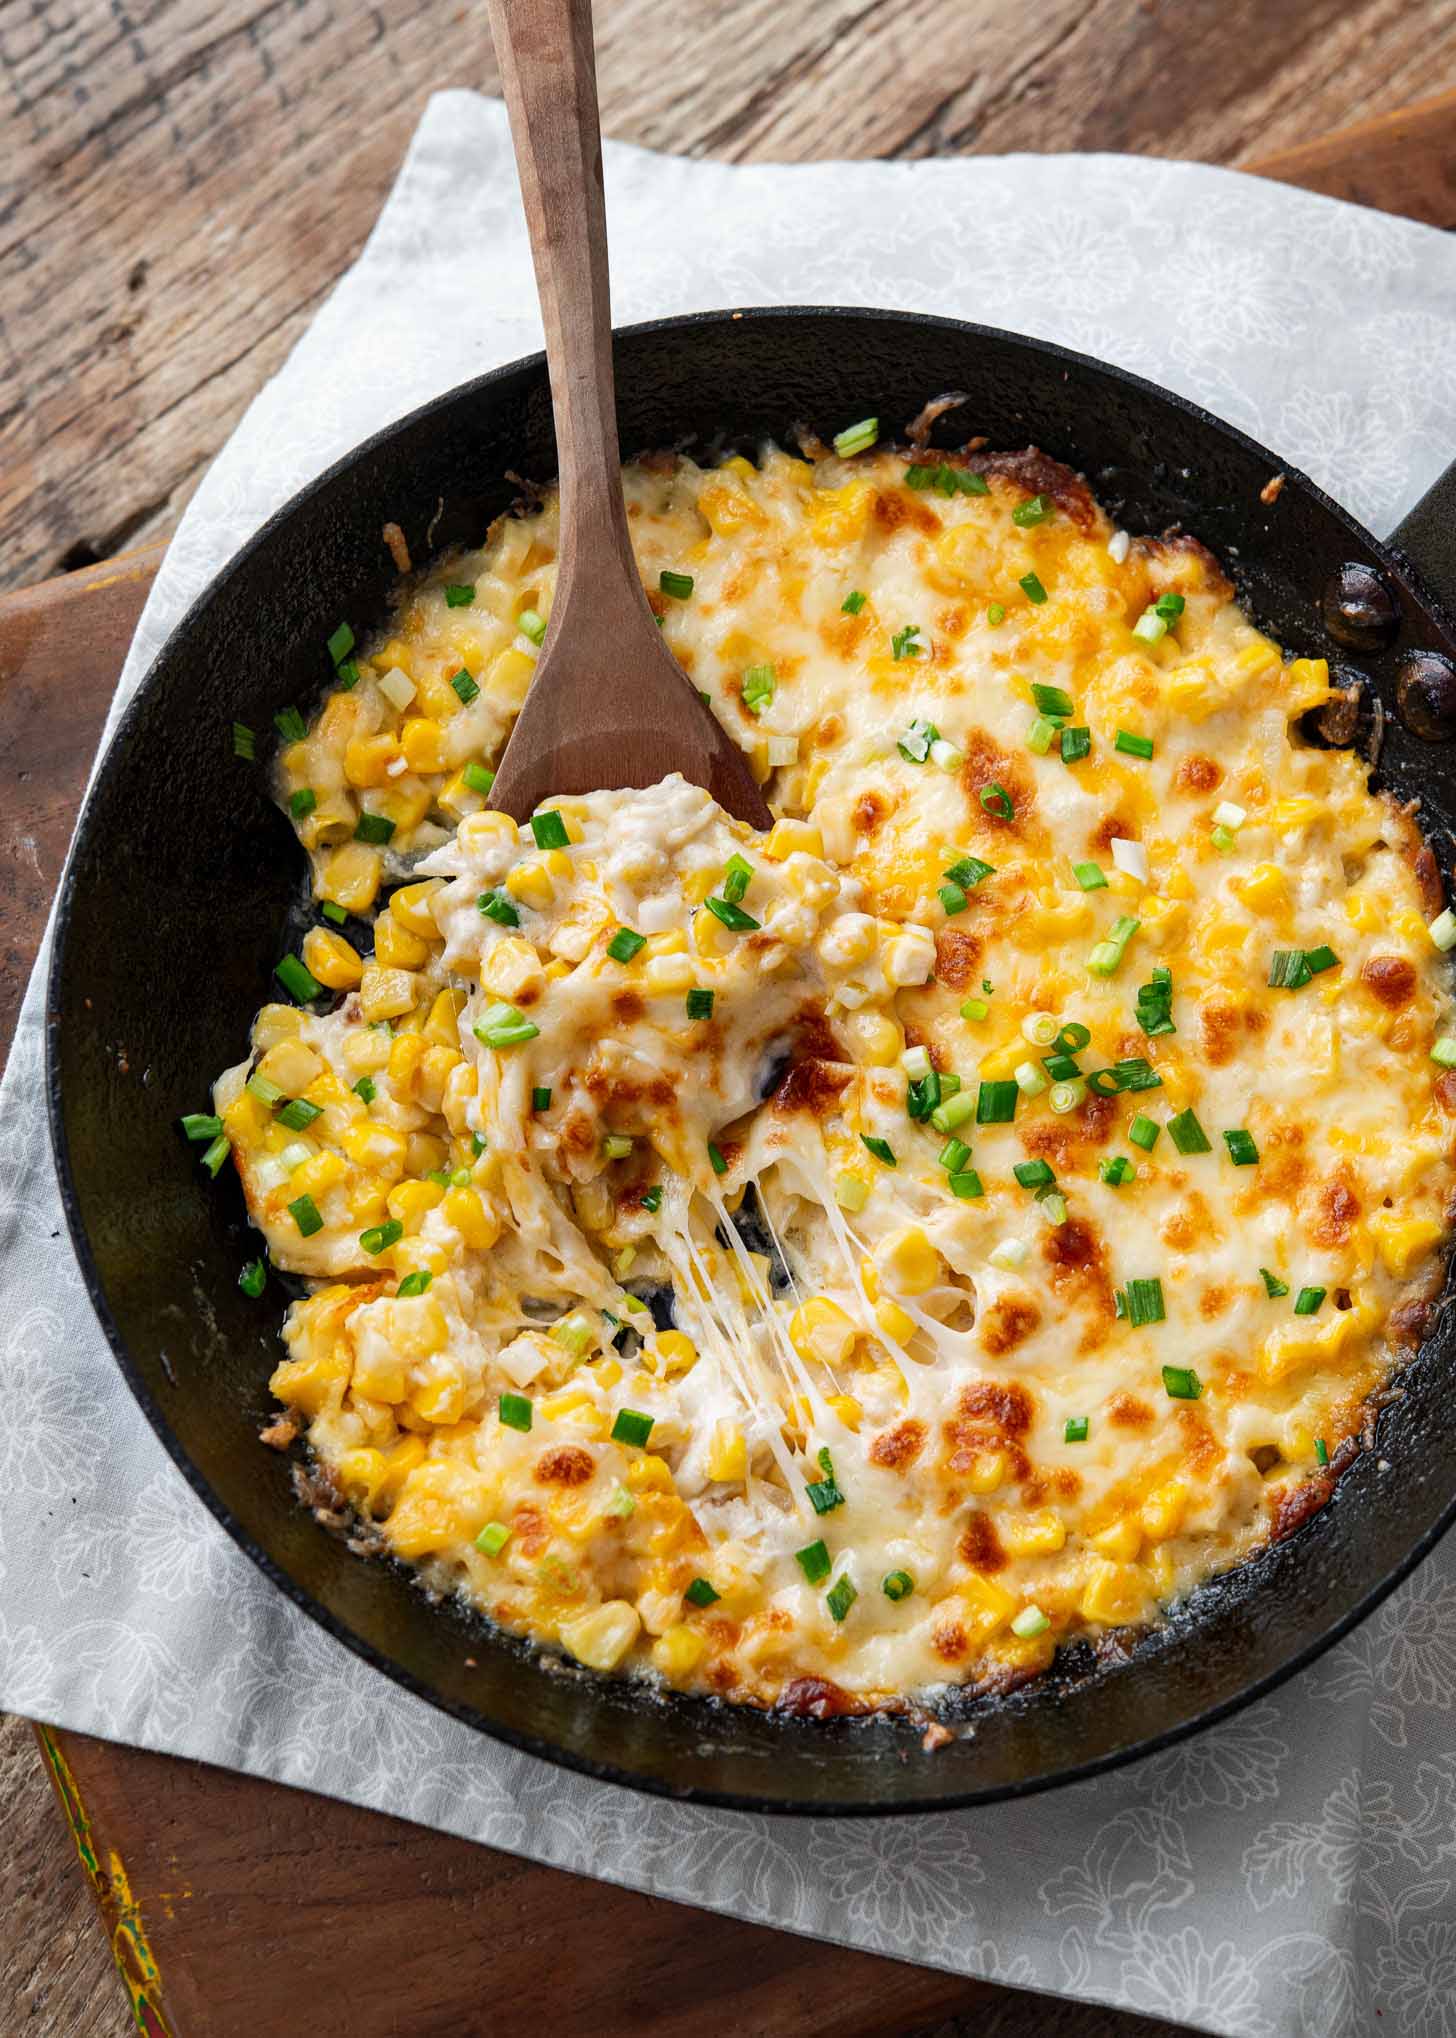 Cheesy Korean corn skillet baked in a cast iron skillet.